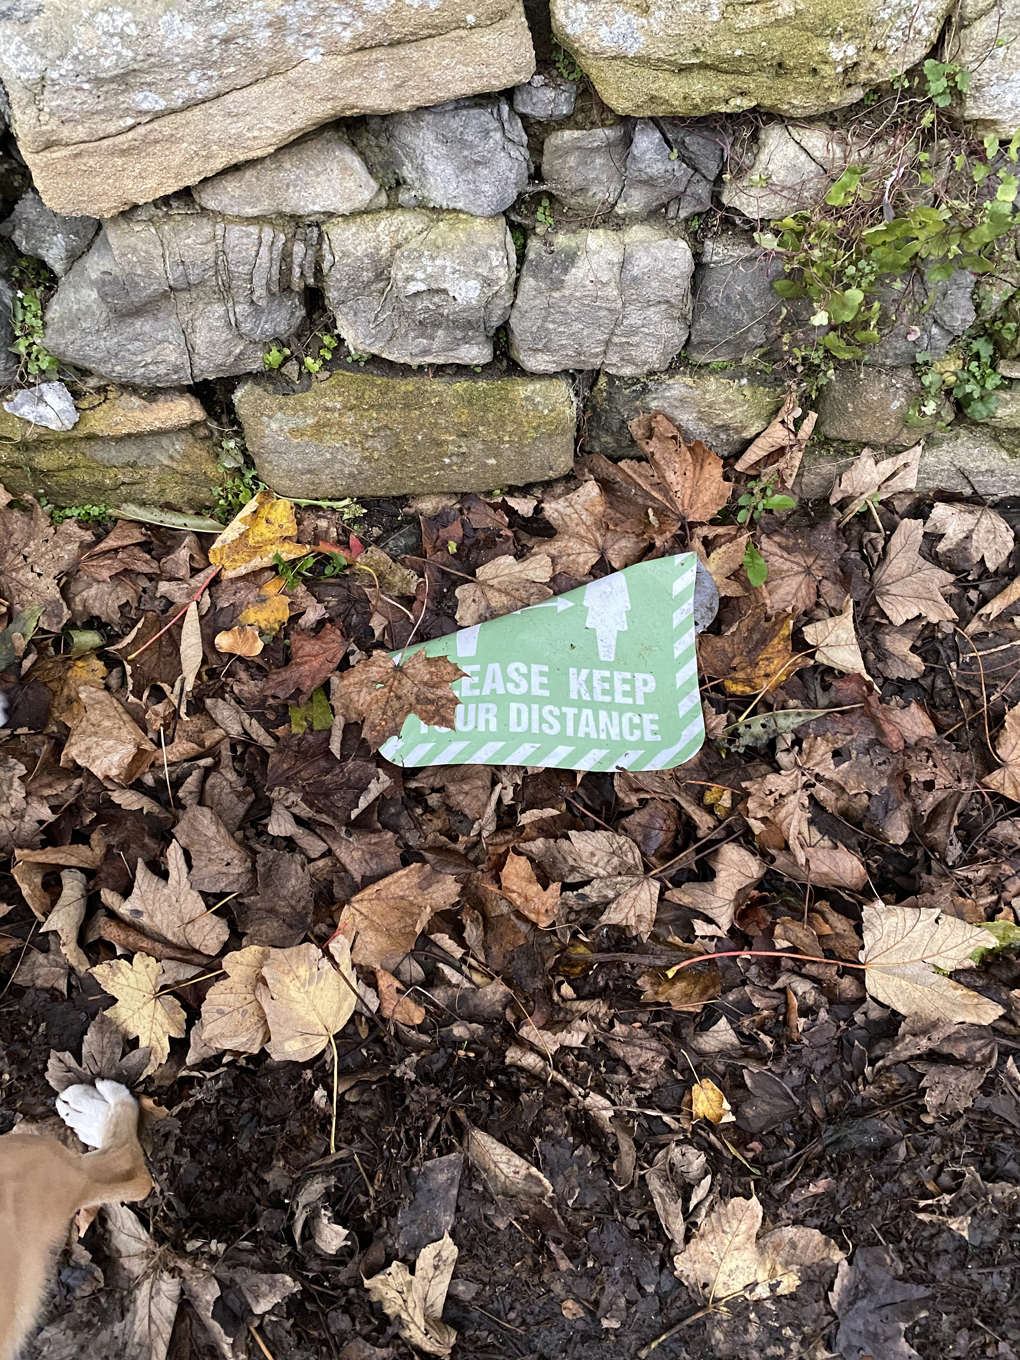 A discarded sign that reads “Please keep your distance” lying on the ground, partially covered in leaves